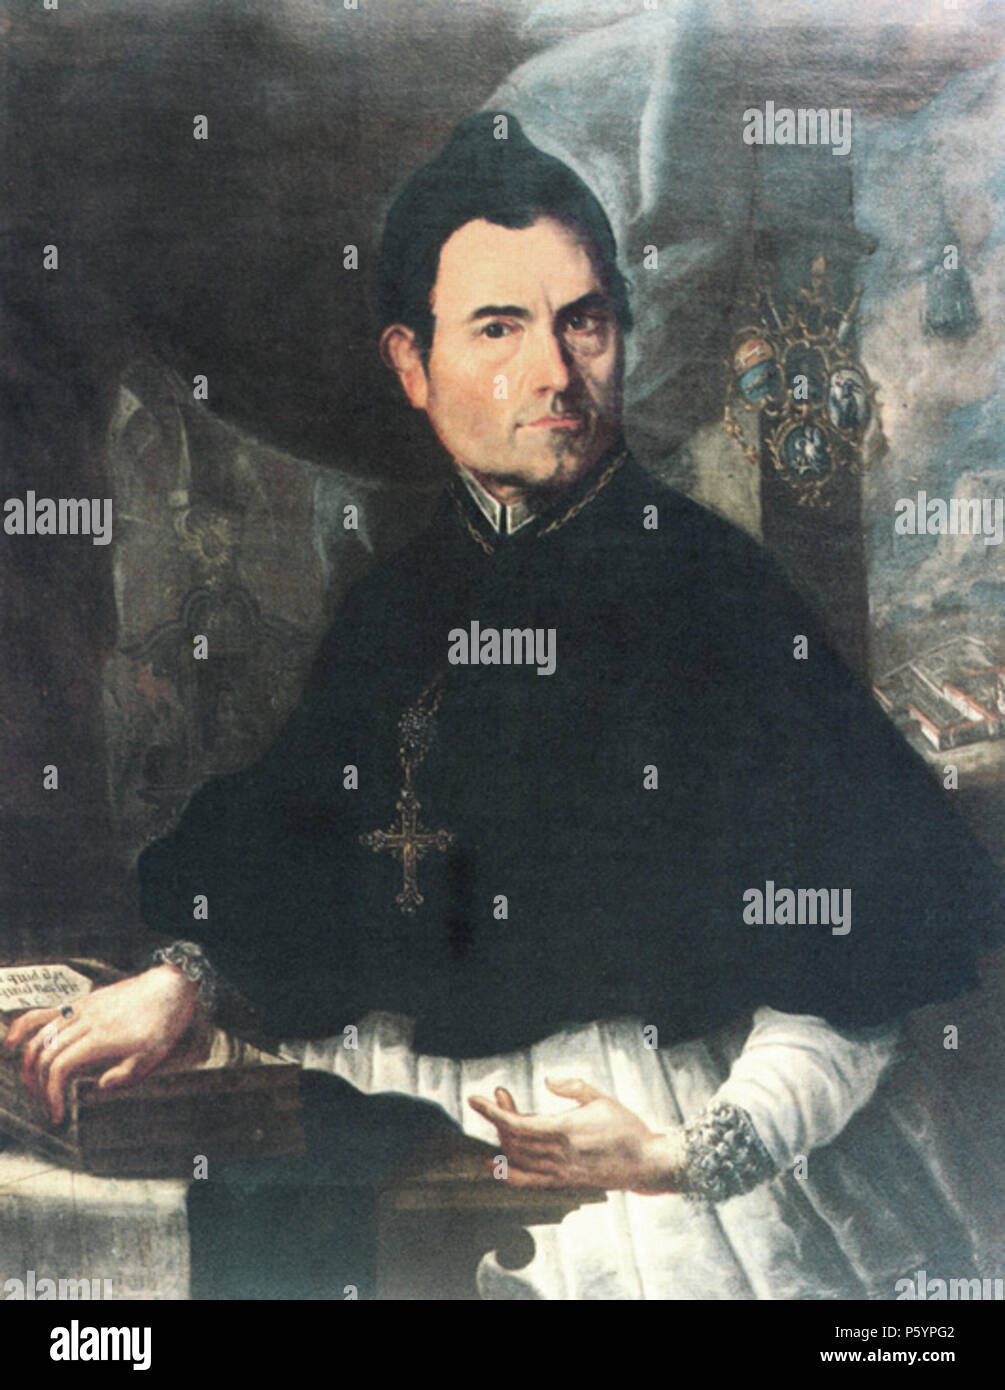 N/A. English: Portrait of Georg Strobel, abbot of the imperial abbey of Petershausen (1761-1786). The portrait, showing the abbot at age 45, now hangs in the Pfullendorf town hall. circa 1770. Unknown, painted c. 1770 55 Abt Georg Strobel (Petershausen 1761-1786) Stock Photo